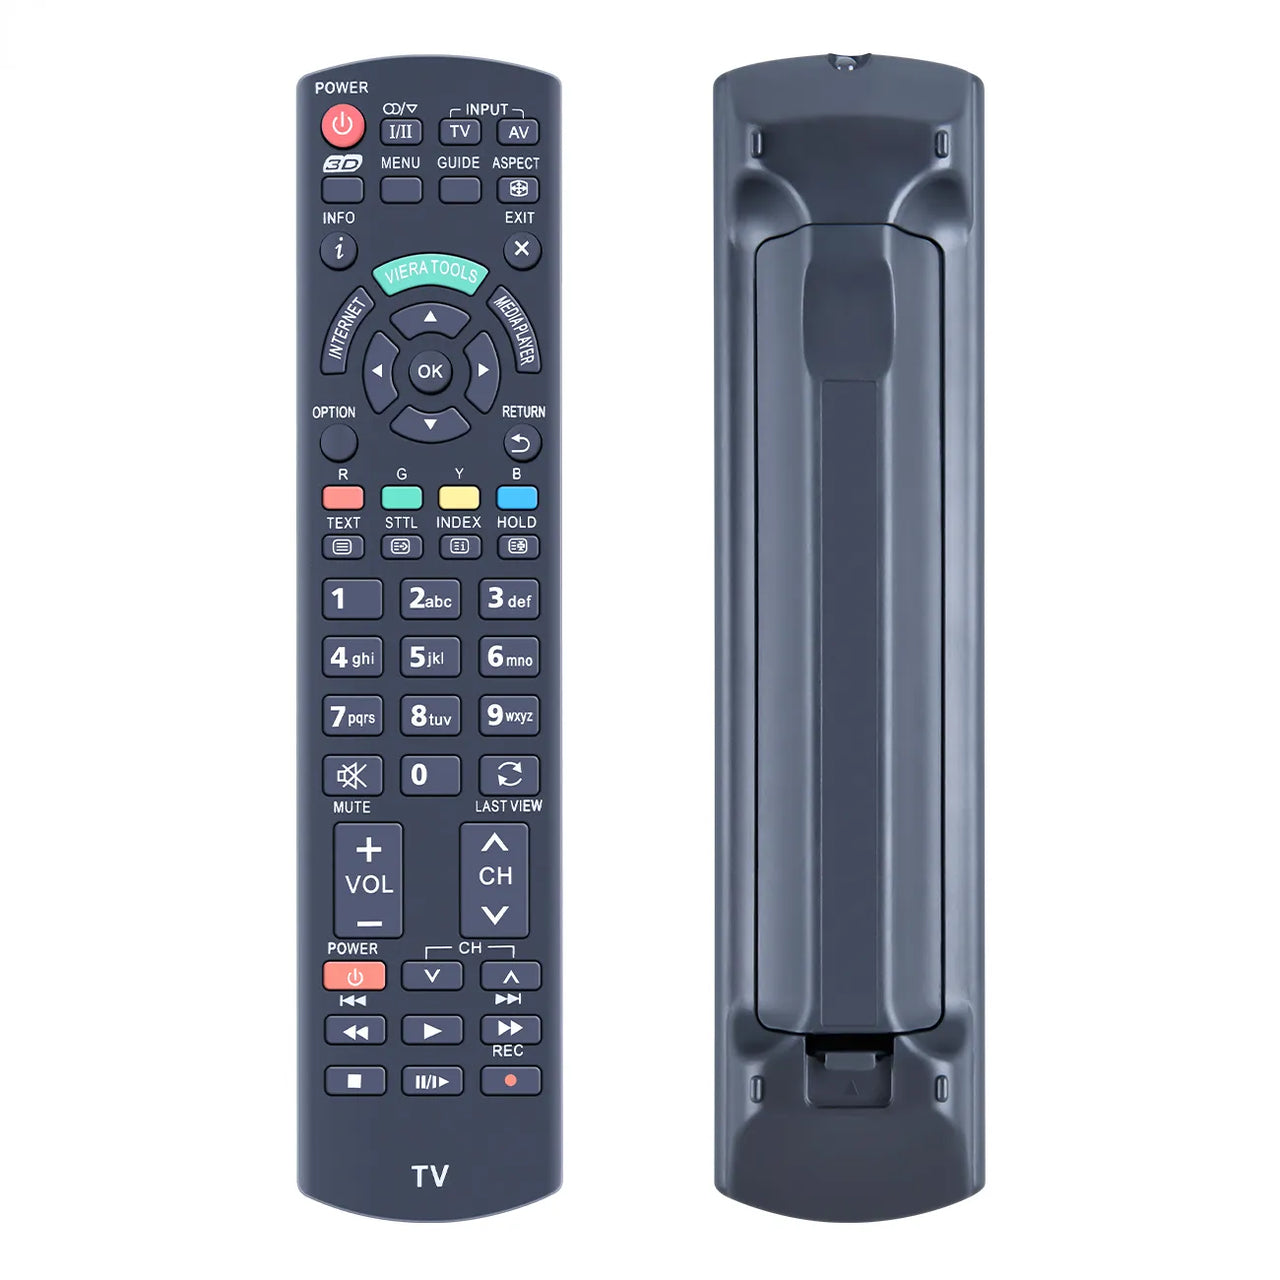 N2QAYB000747 Replacement Remote for Panasonic Televisions